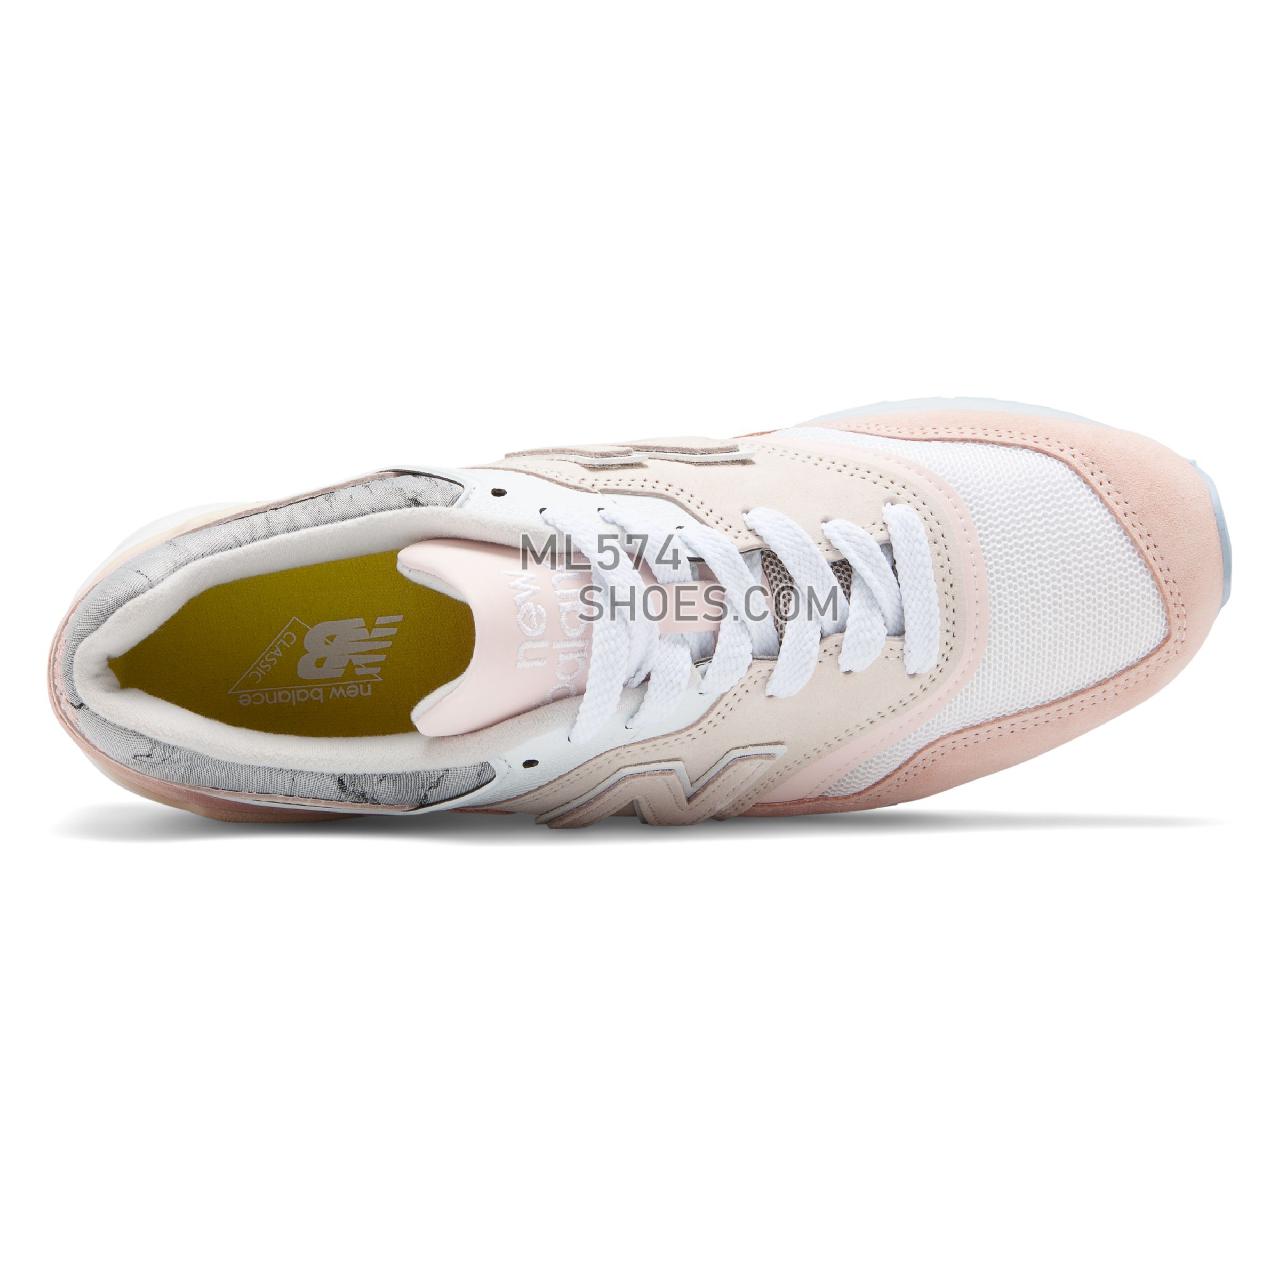 New Balance Made in US 997 - Men's Made in US 997 - White with Pink - M997LBH